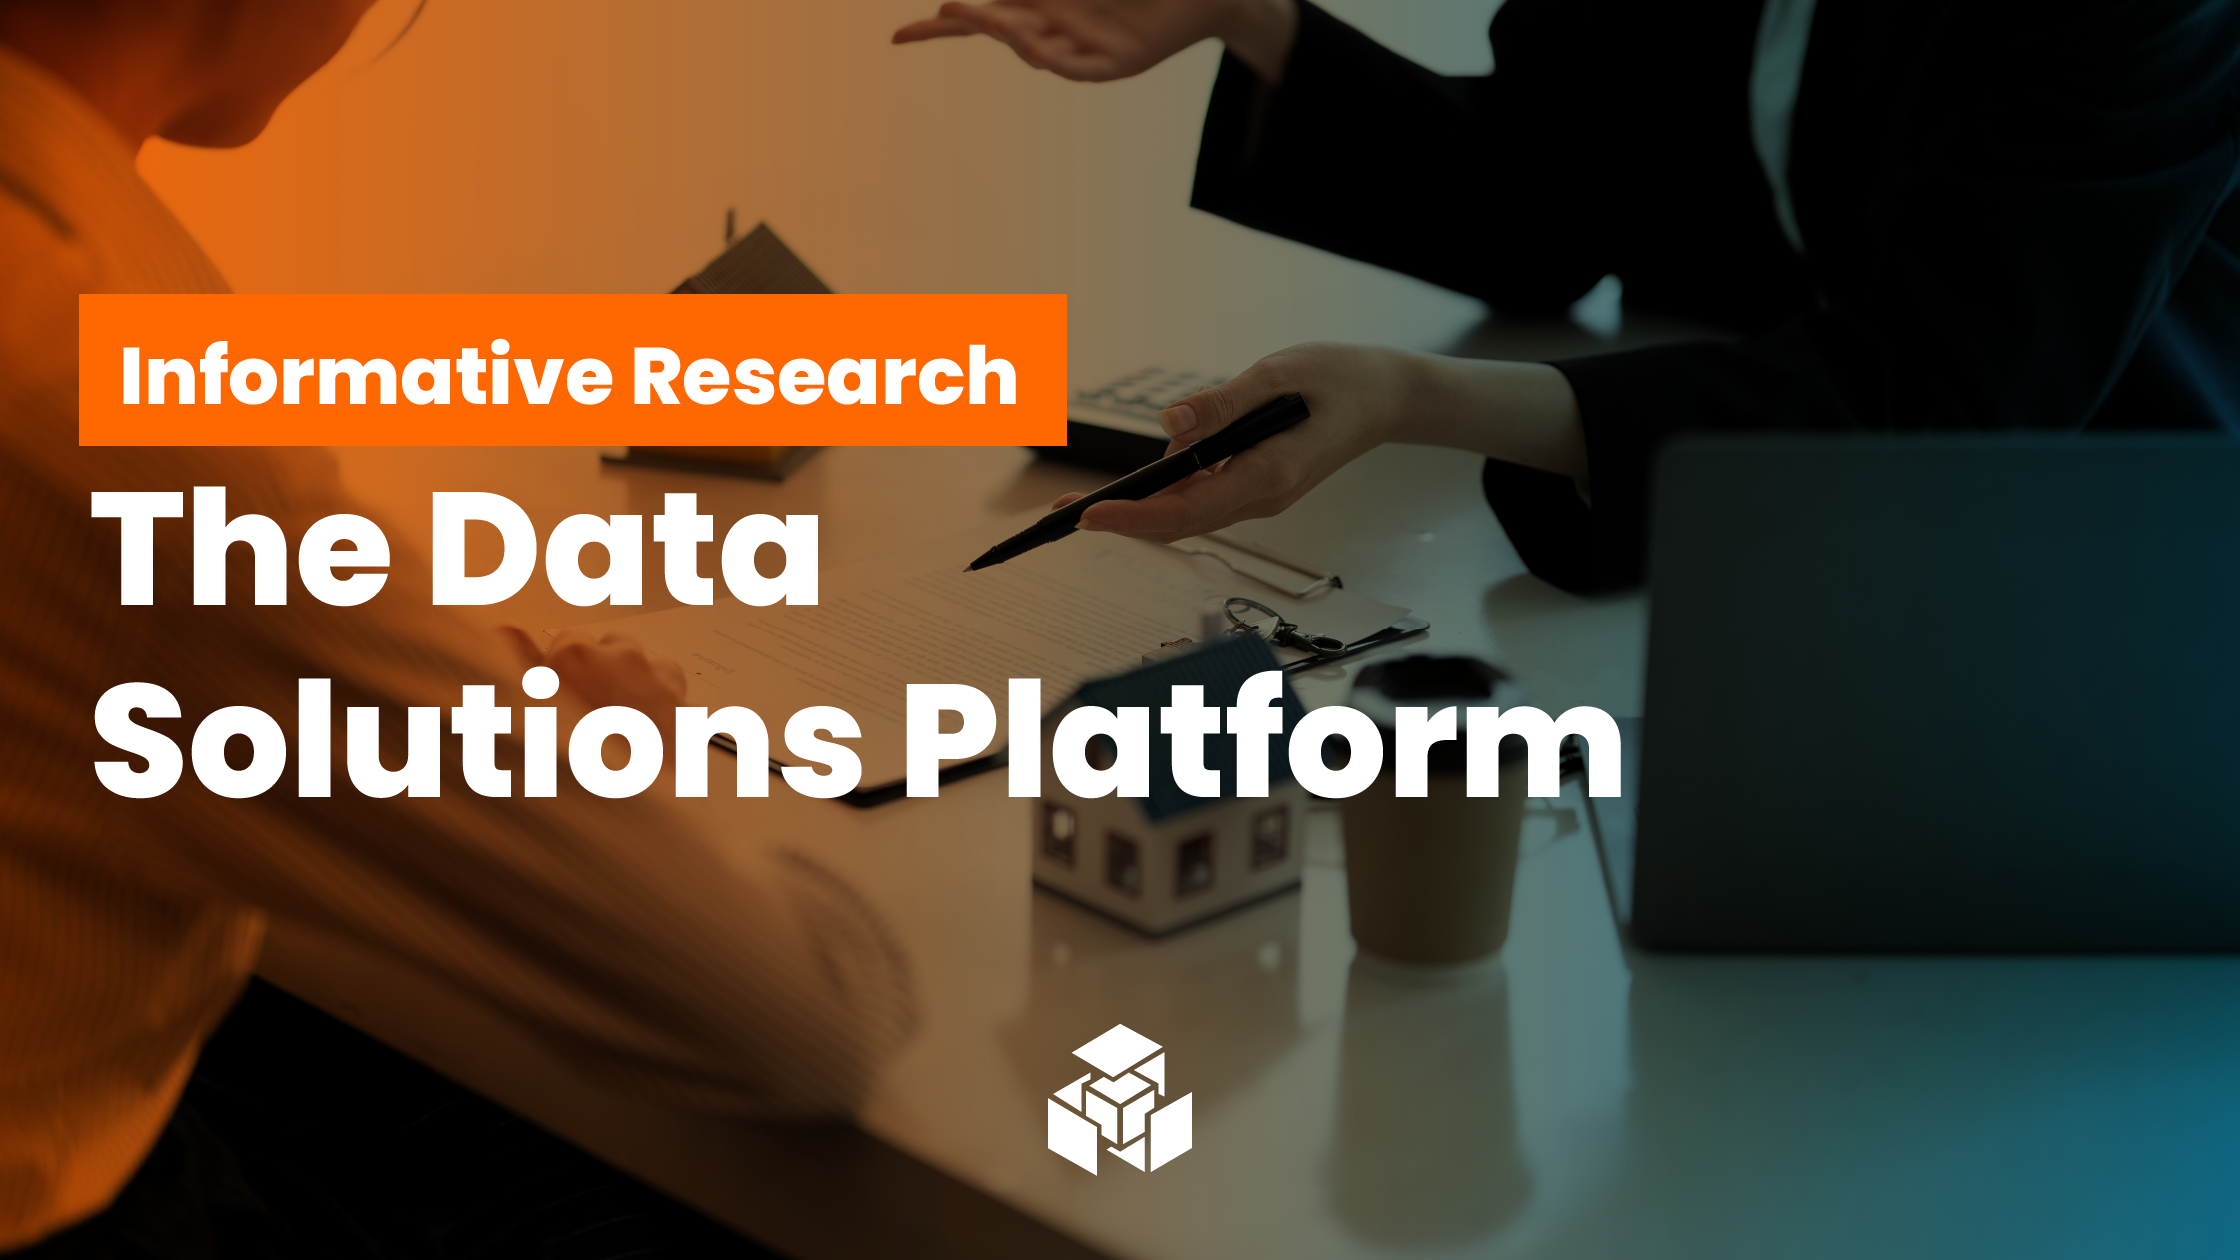 From Start to Finish, Informative Research Has a Data Solution